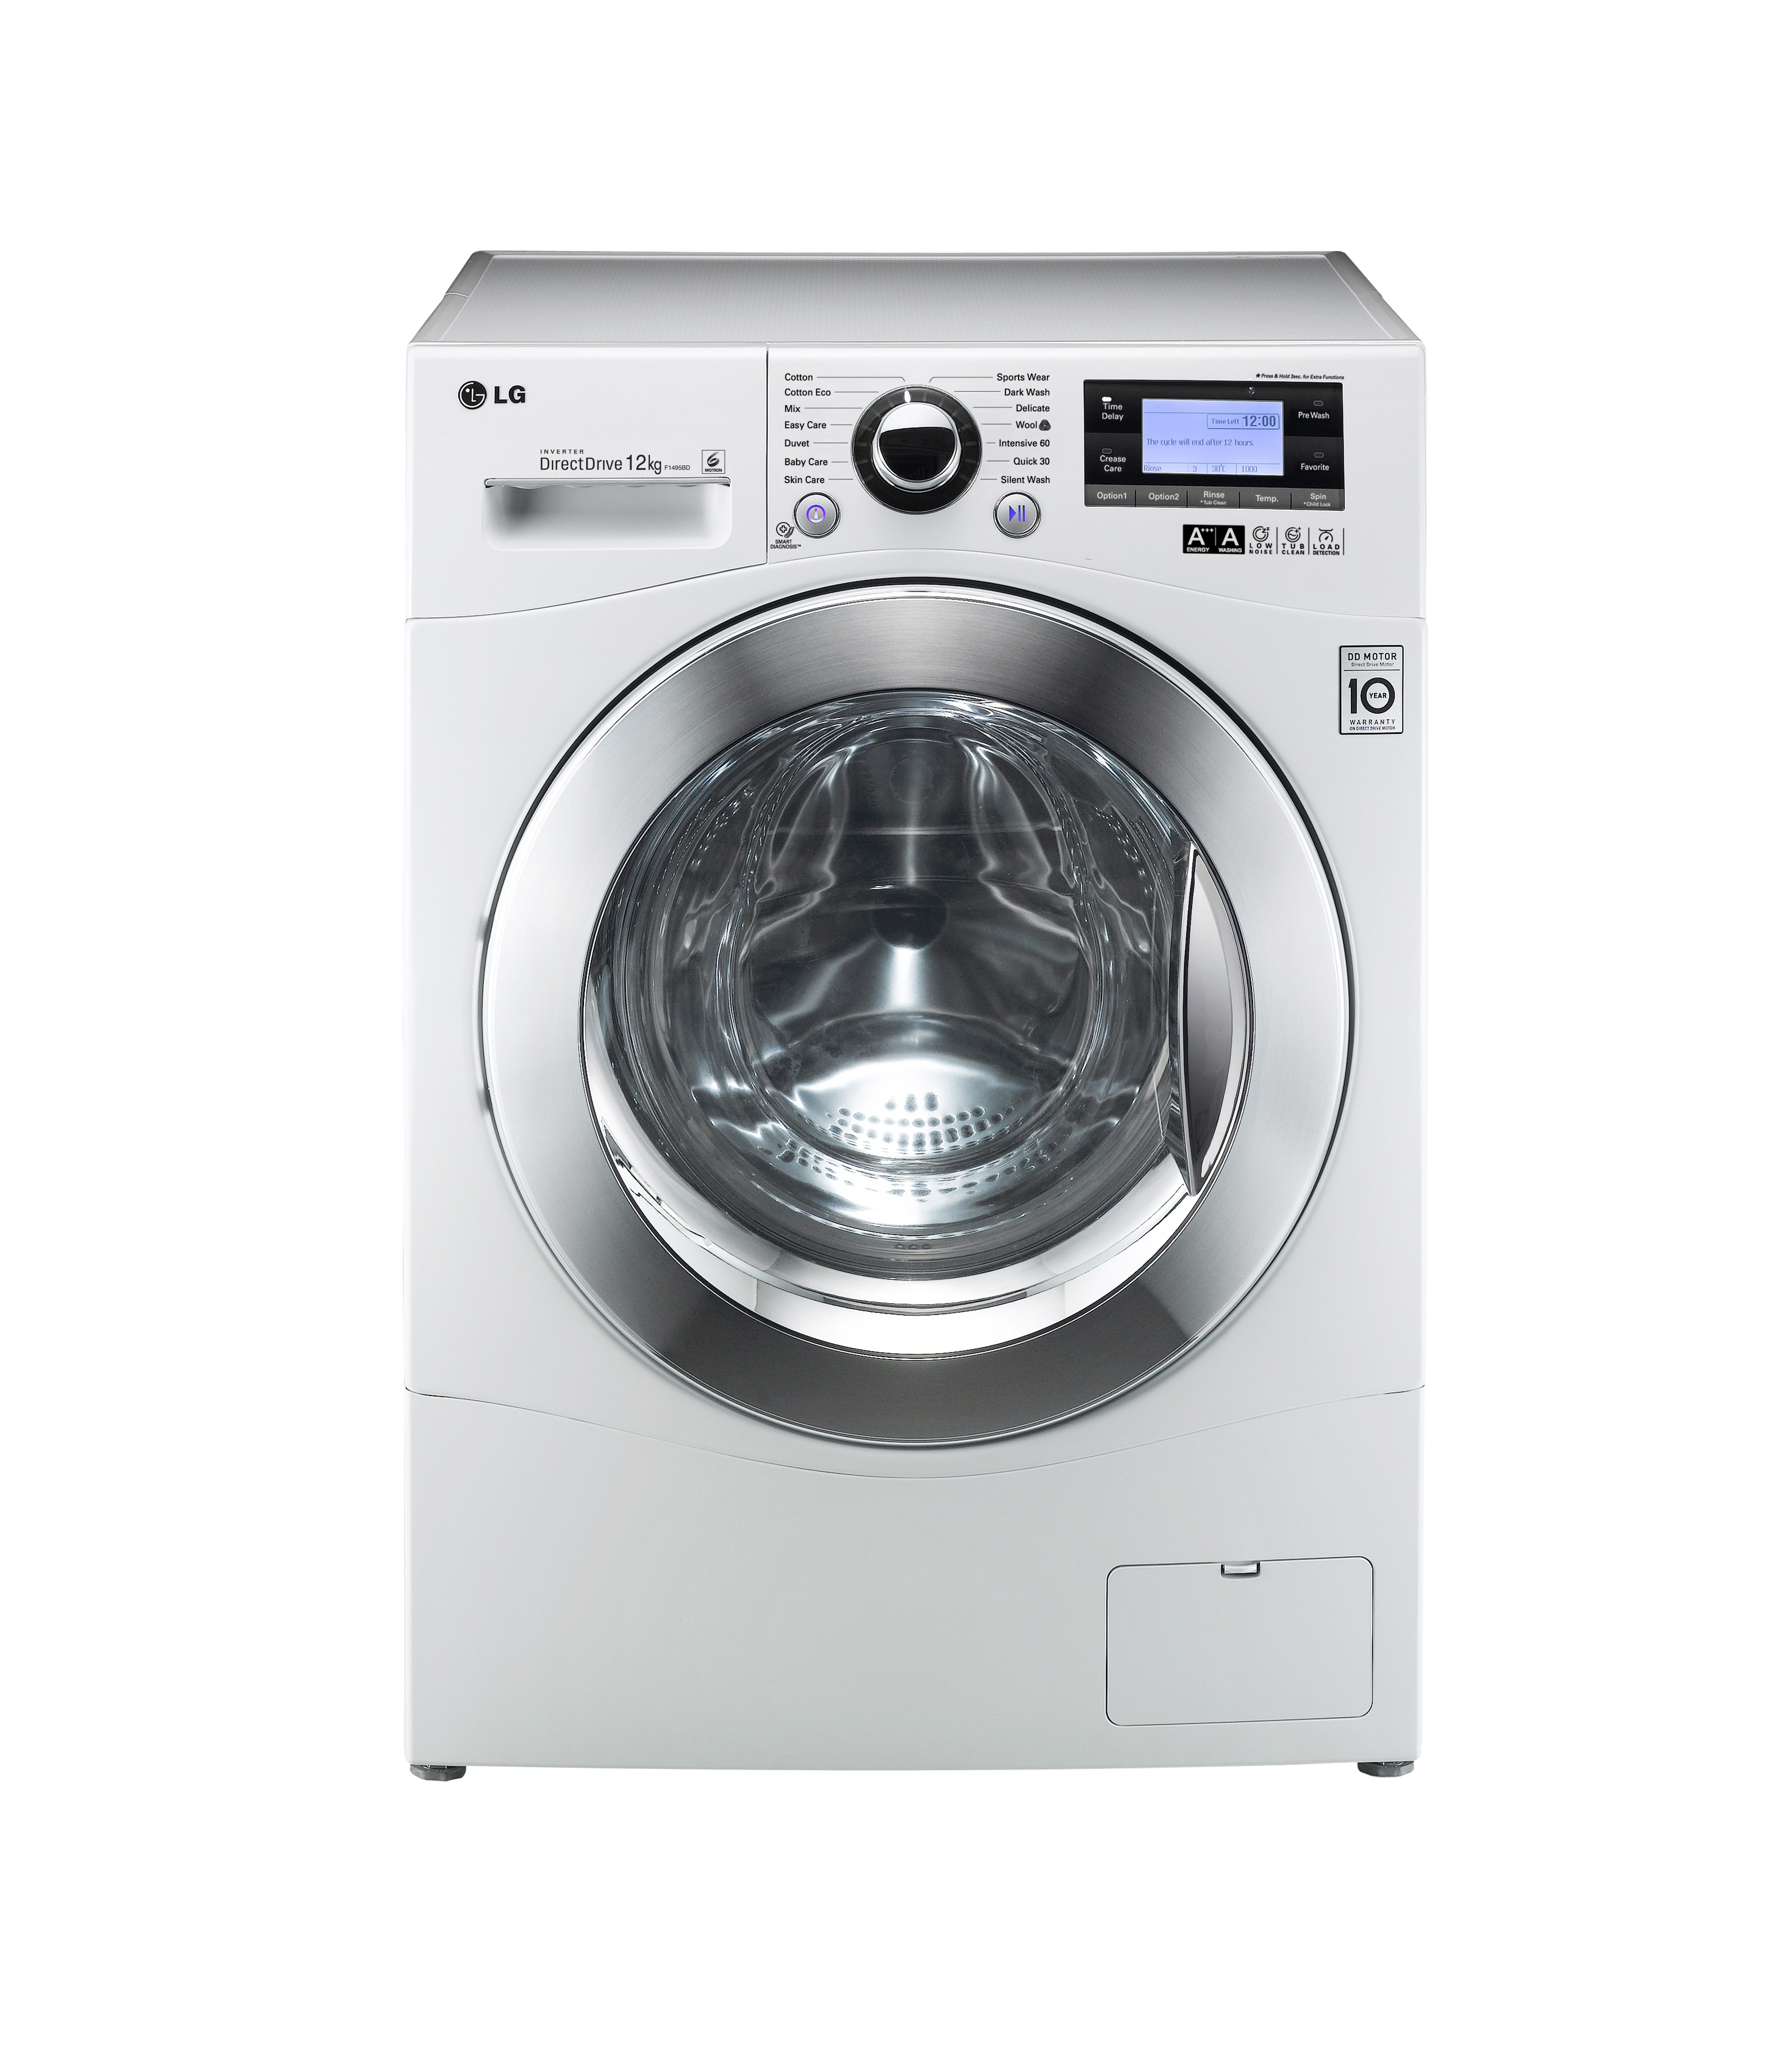 Front view of the LG 12kg front-load washing machine